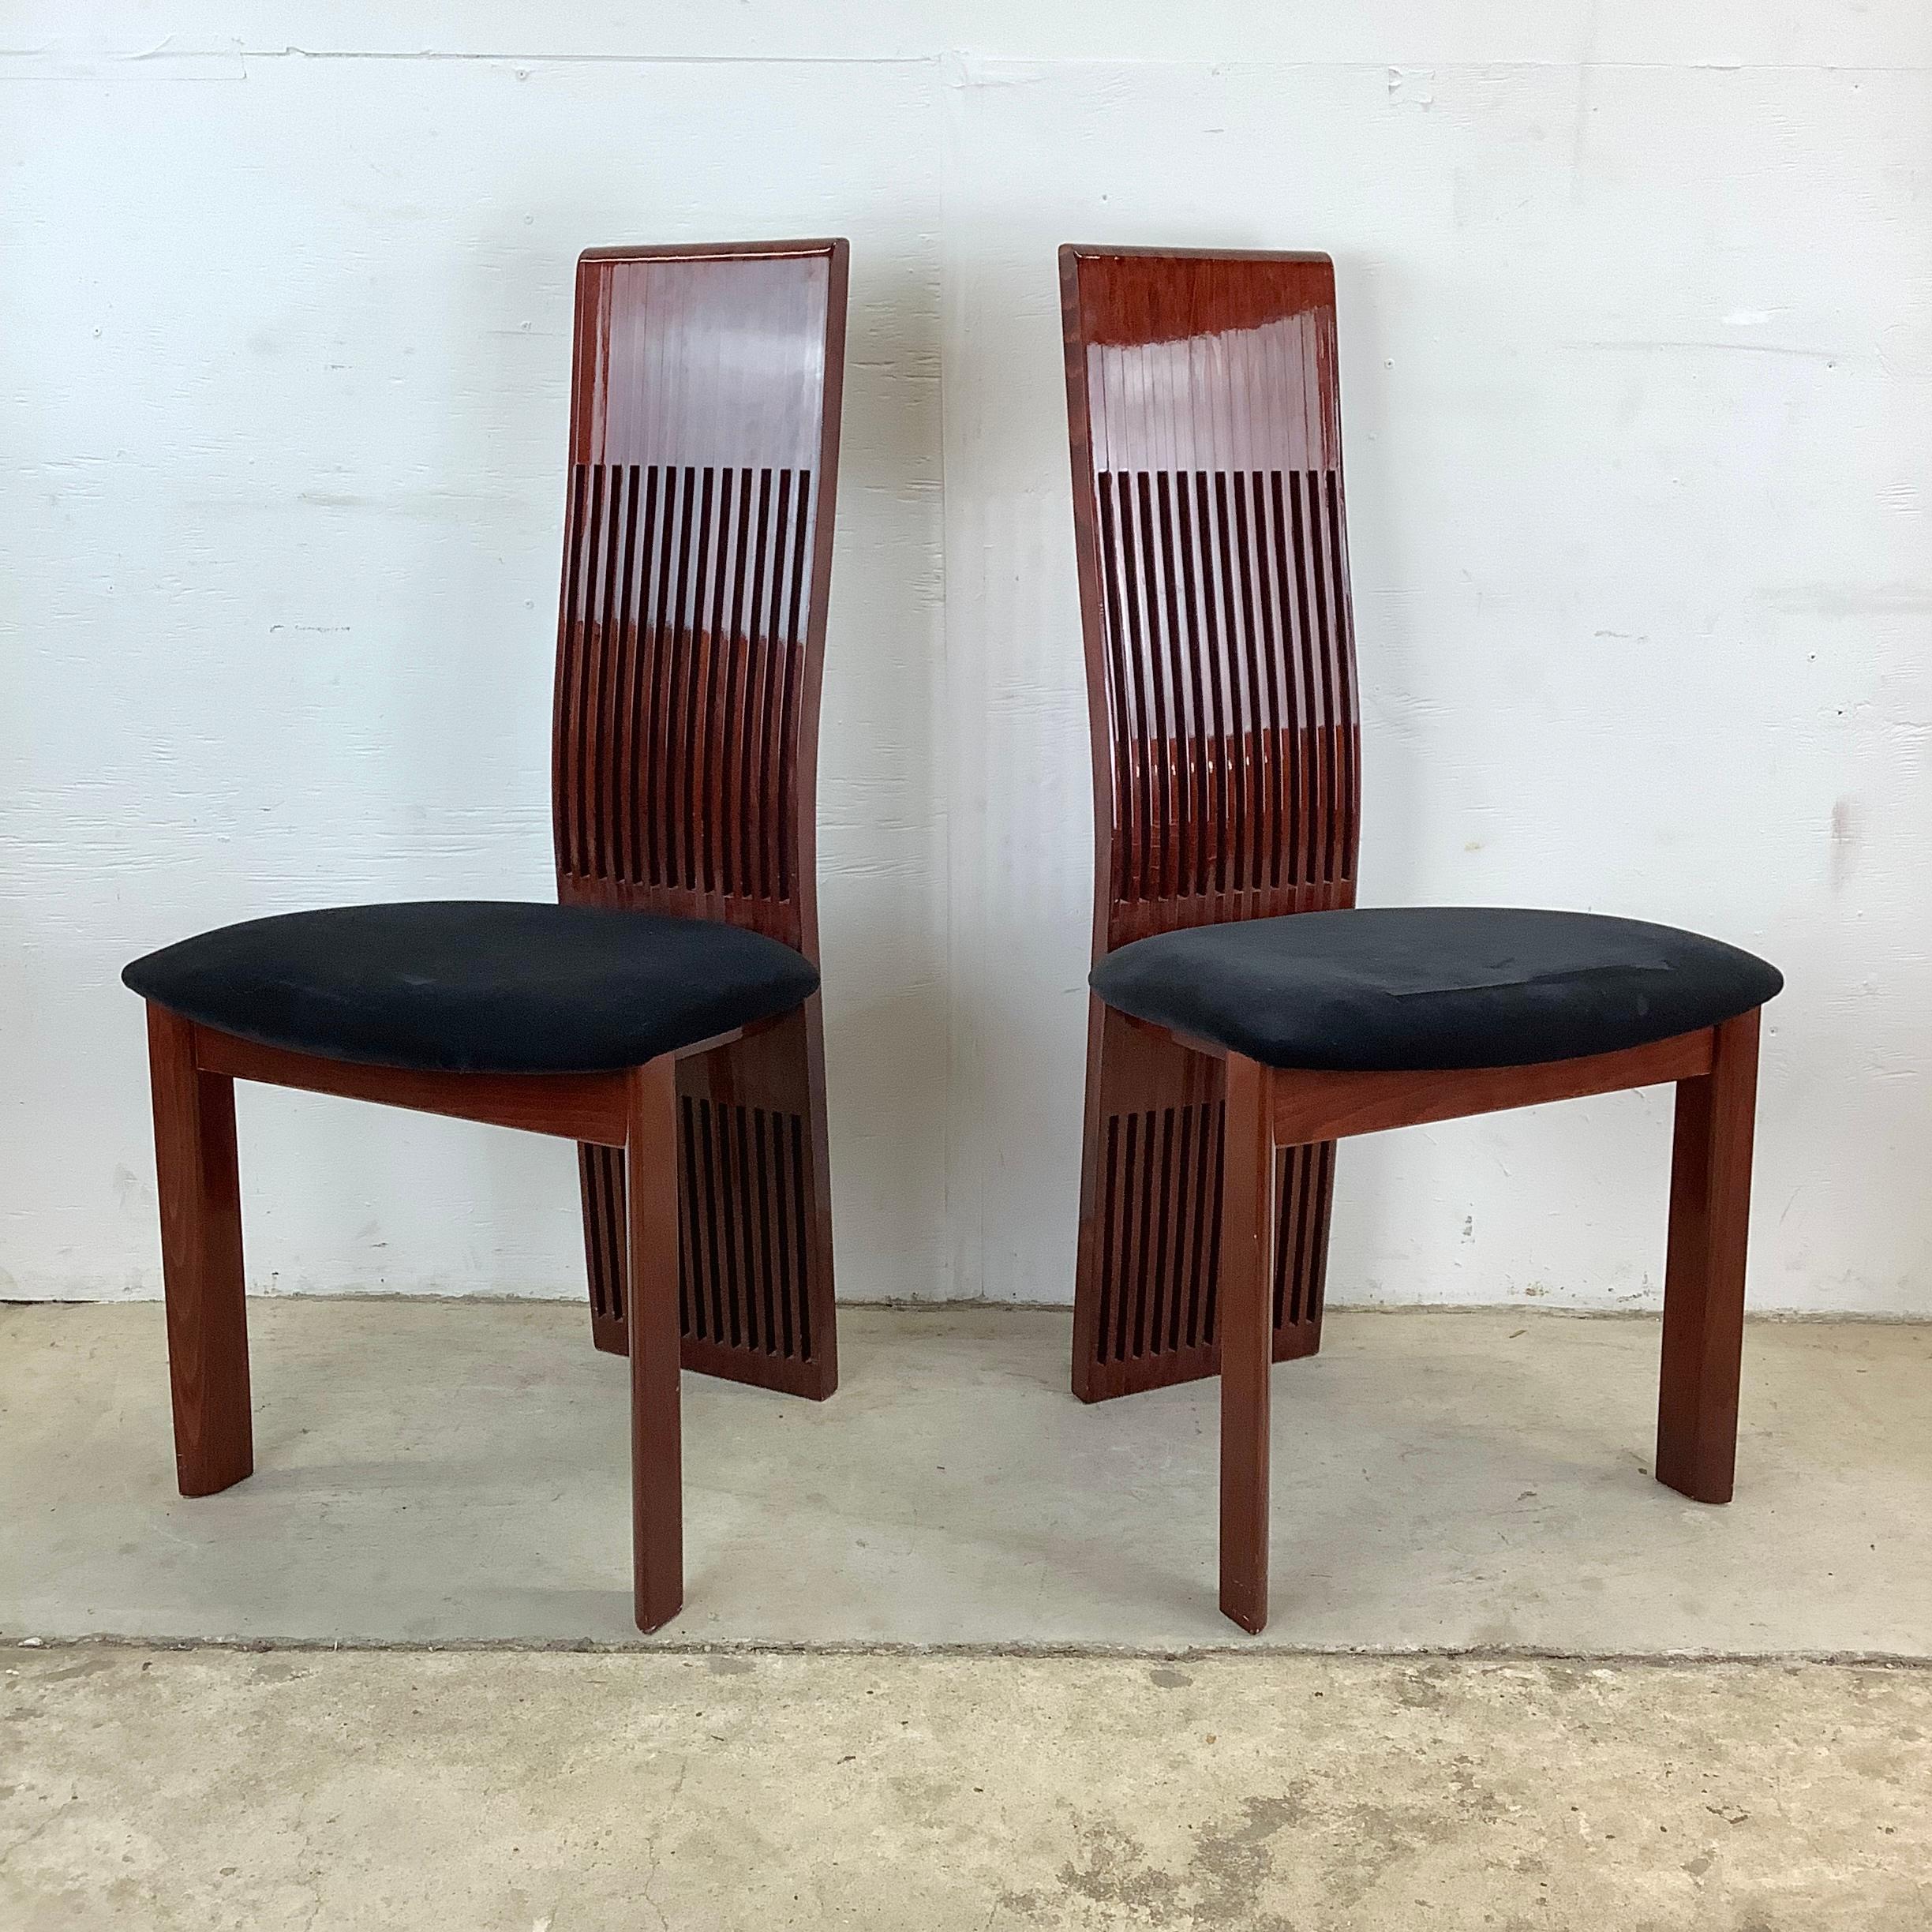 Upholstery 20th Century Italian Modern Dining Chairs- set of 8